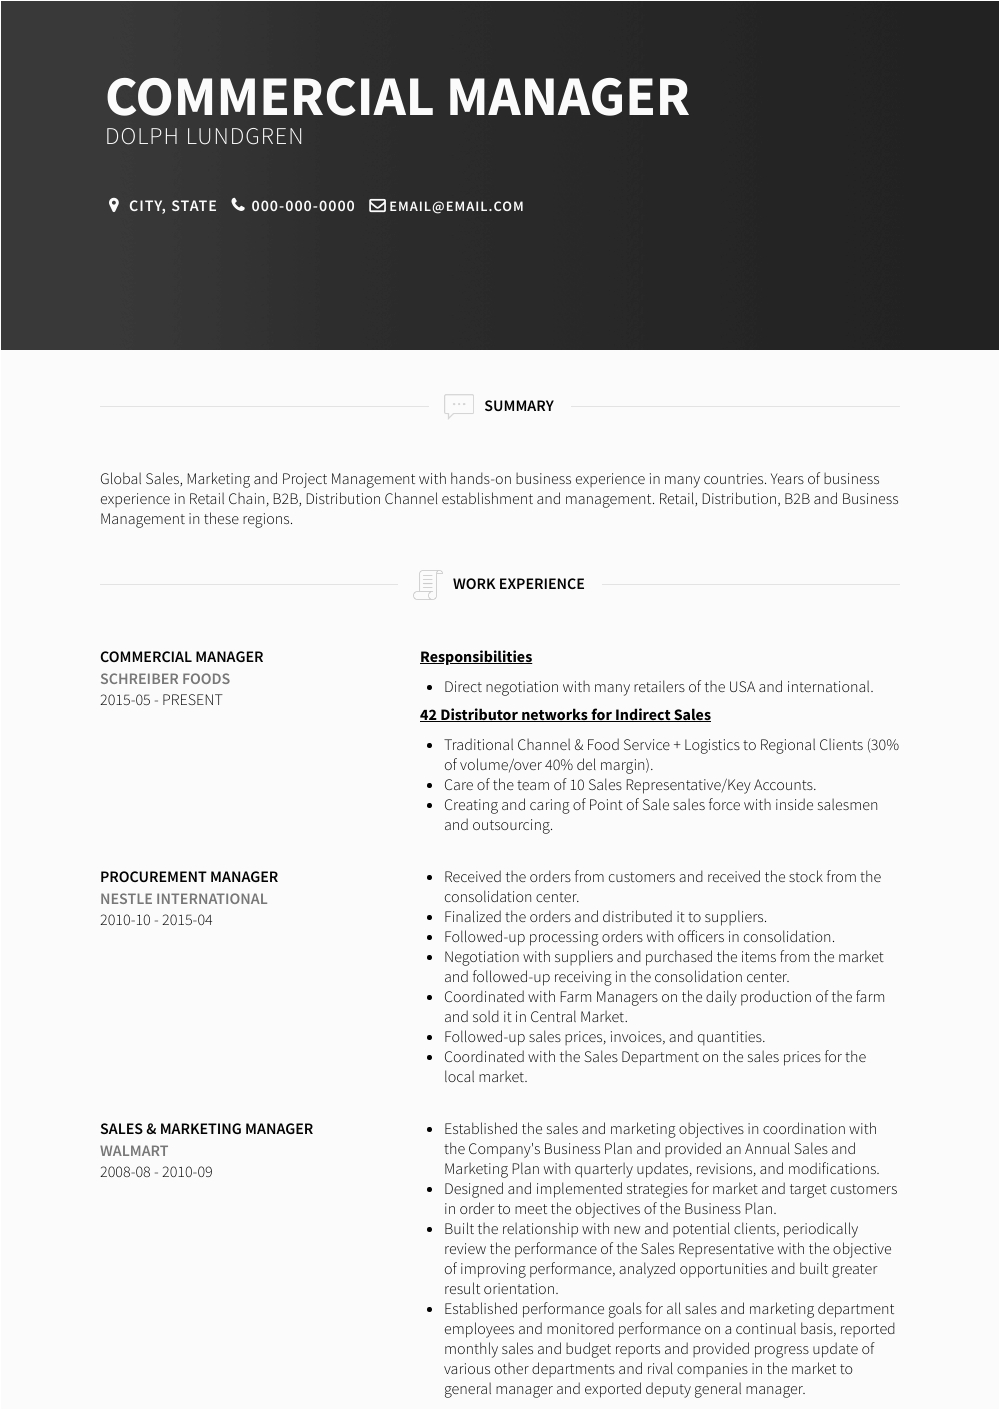 Sample Resume for Commercial Manager In India Mercial Manager Resume Samples and Templates